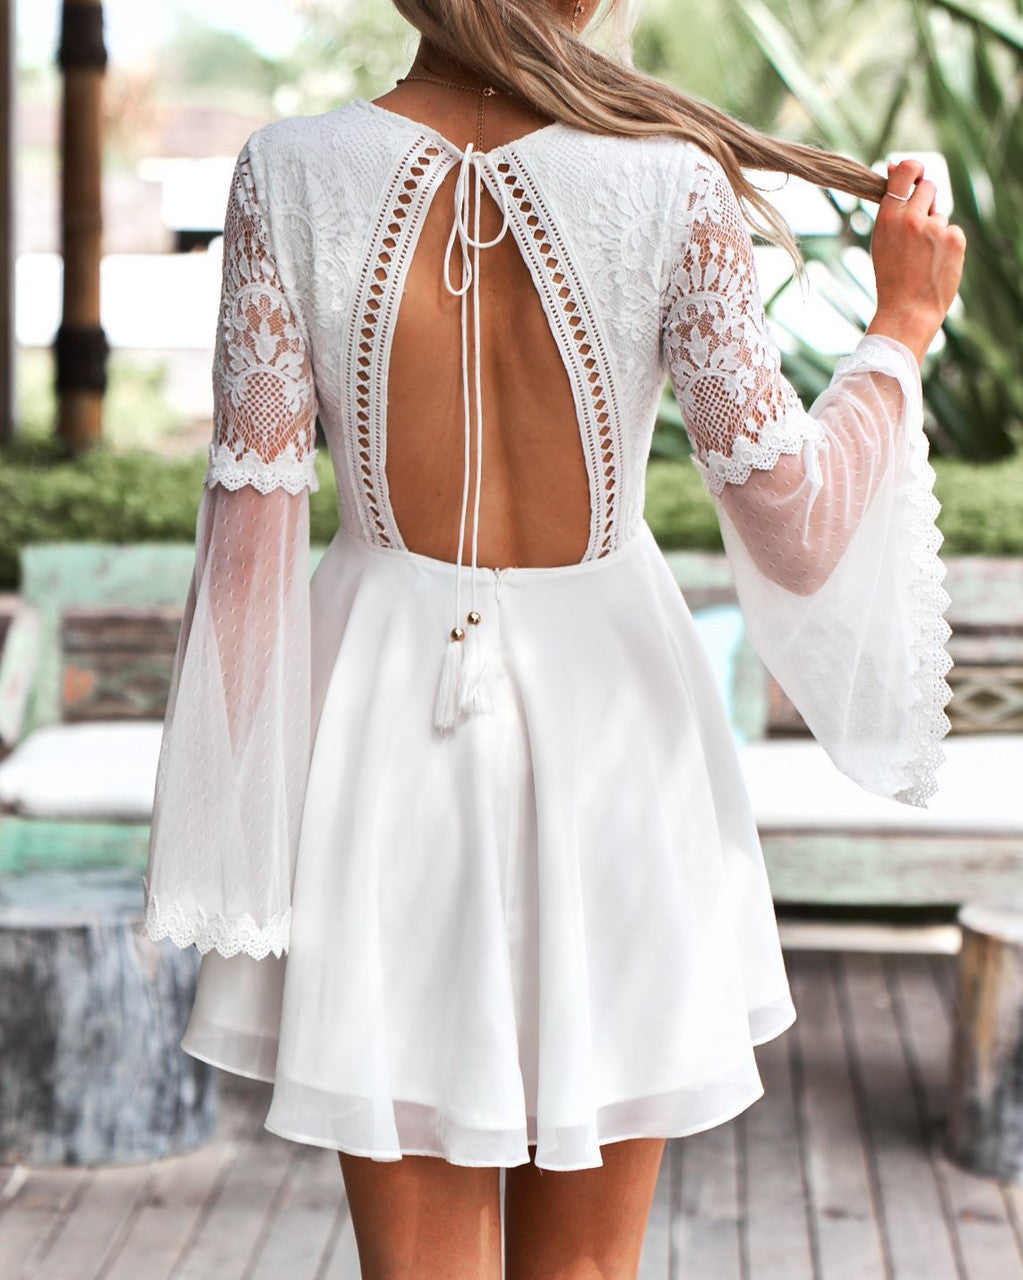 The Bethany dress in White by Two Sisters the Label. White bell sleeve boho dress with open back.